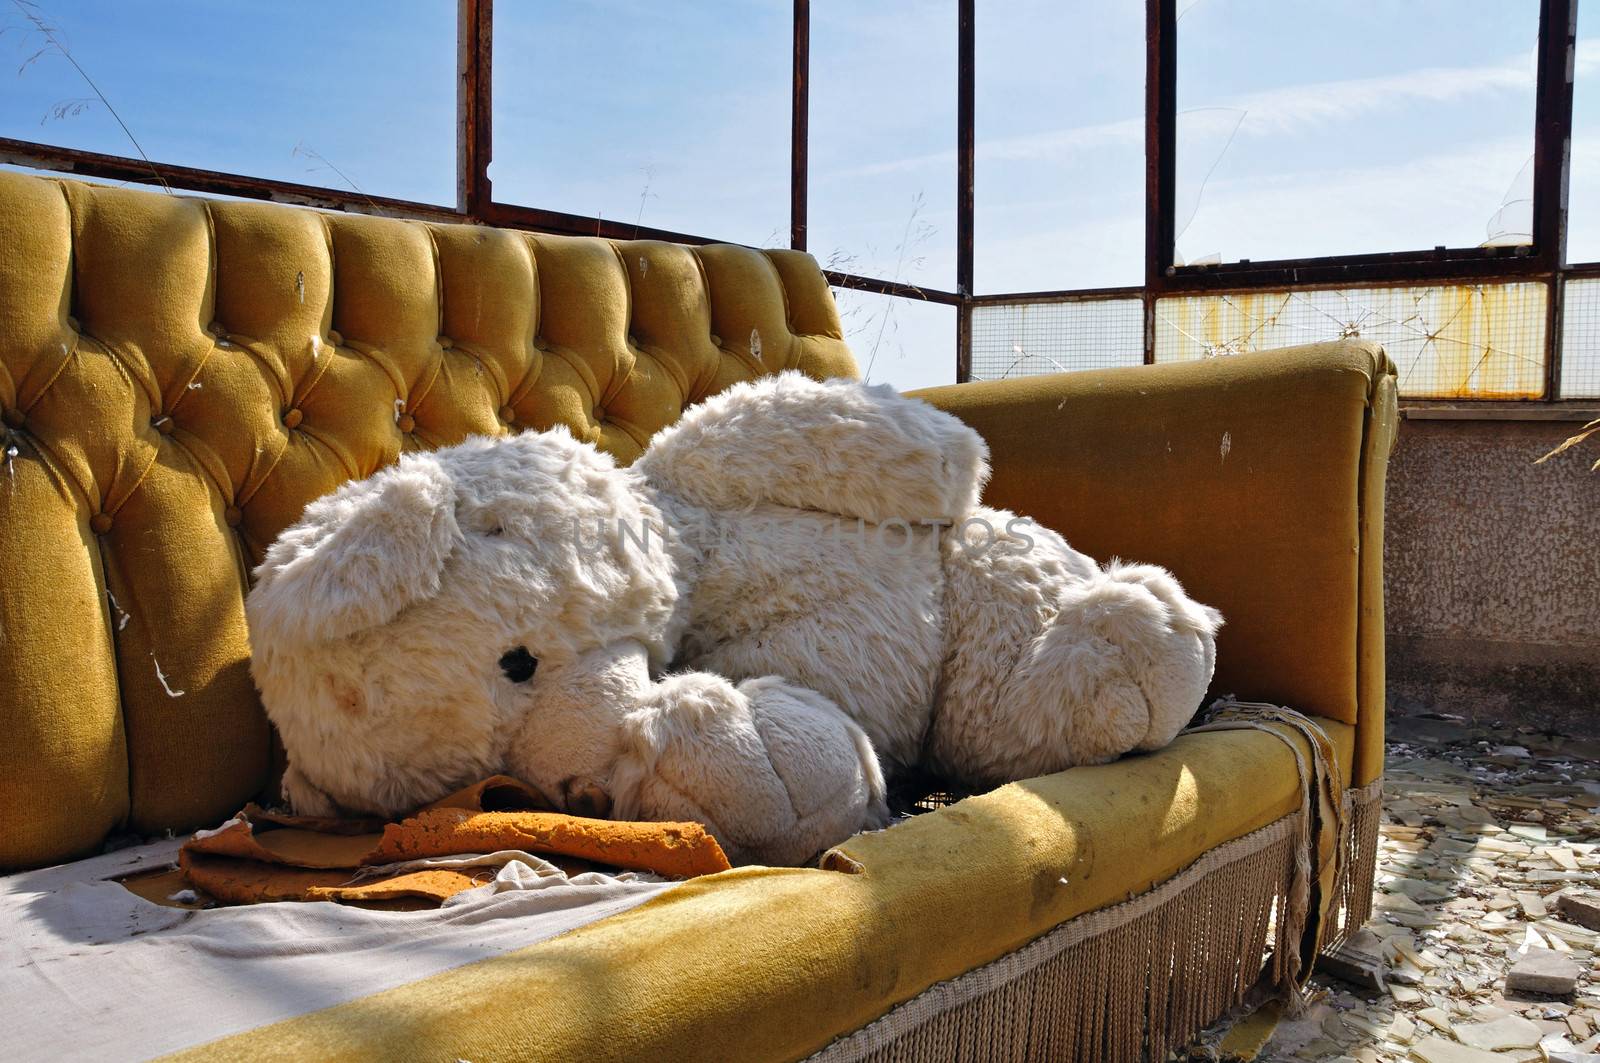 teddy bear and couch in abandoned building by sirylok